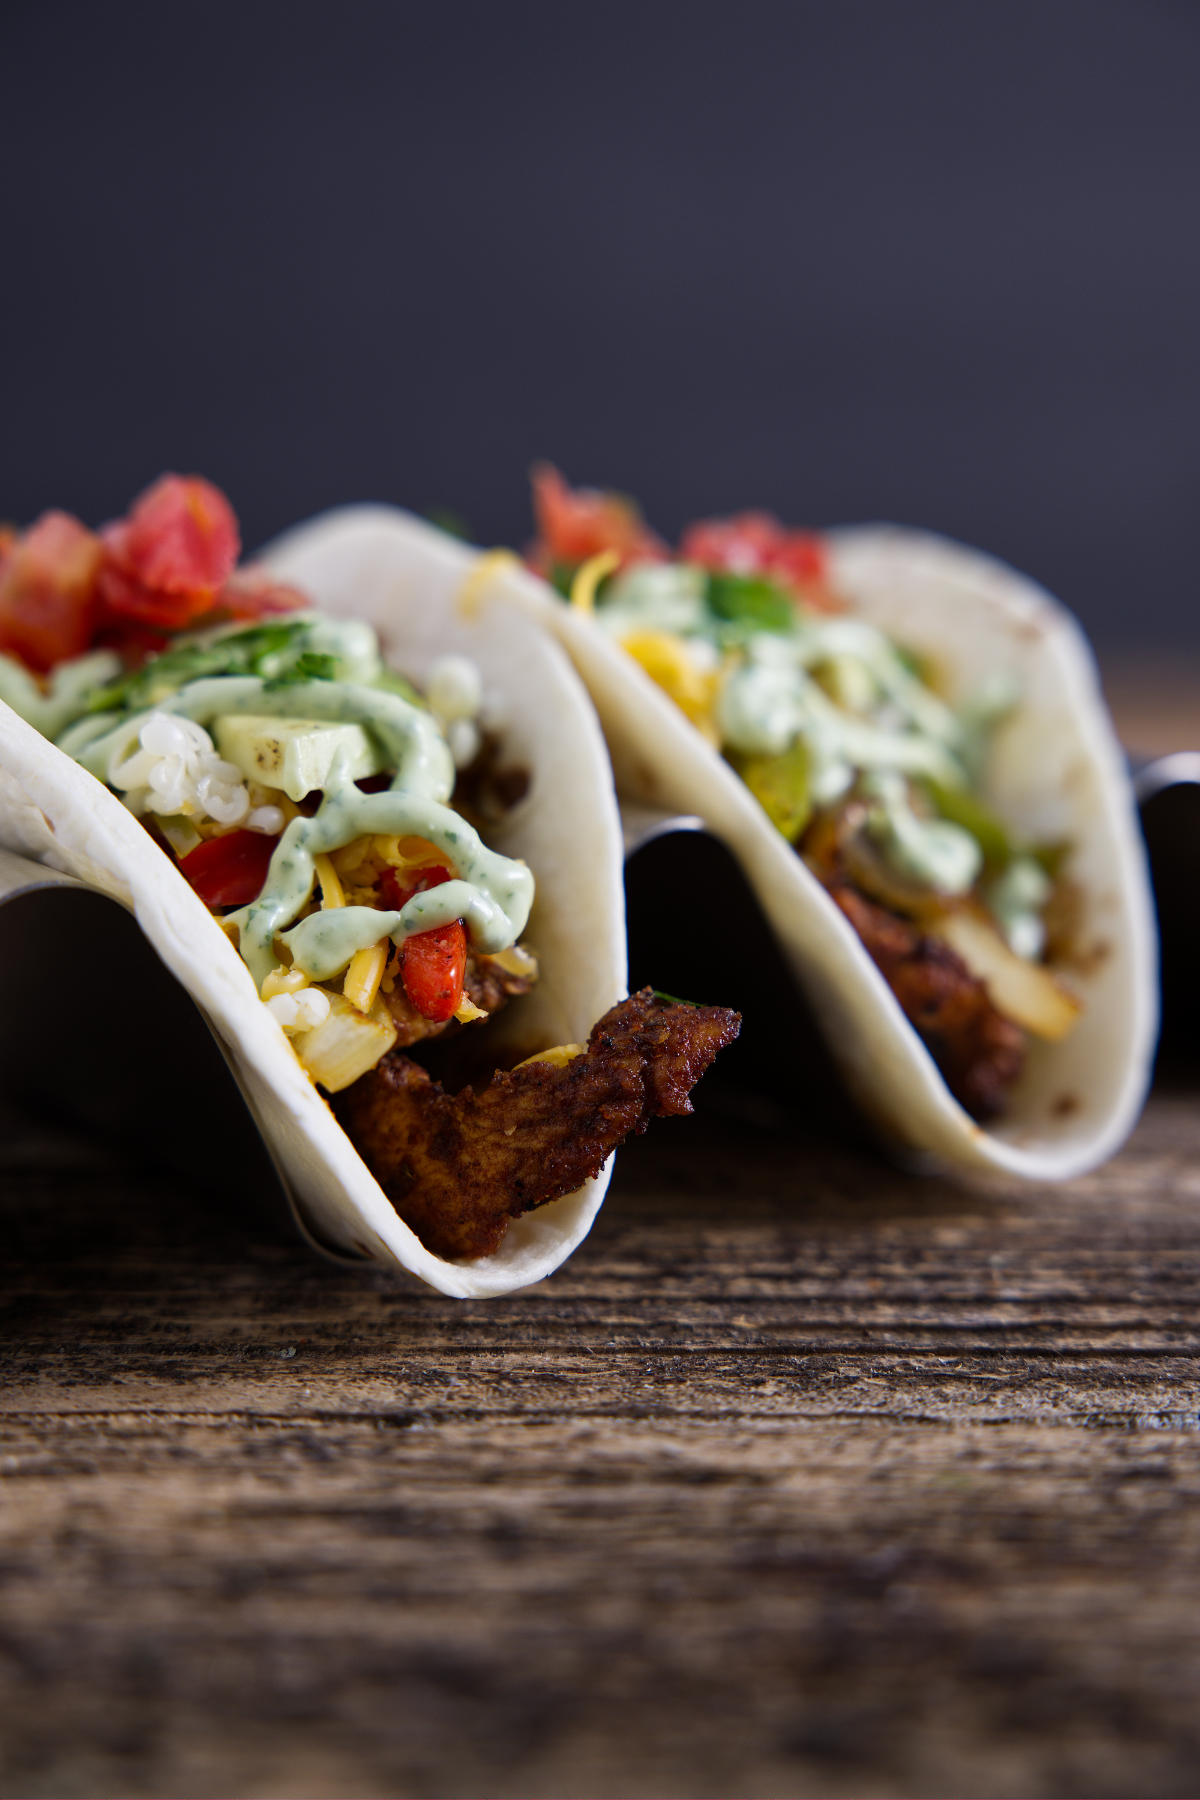 Two tacos filled with Blackstone fajita fixings and topped with a drizzle of avocado crema.